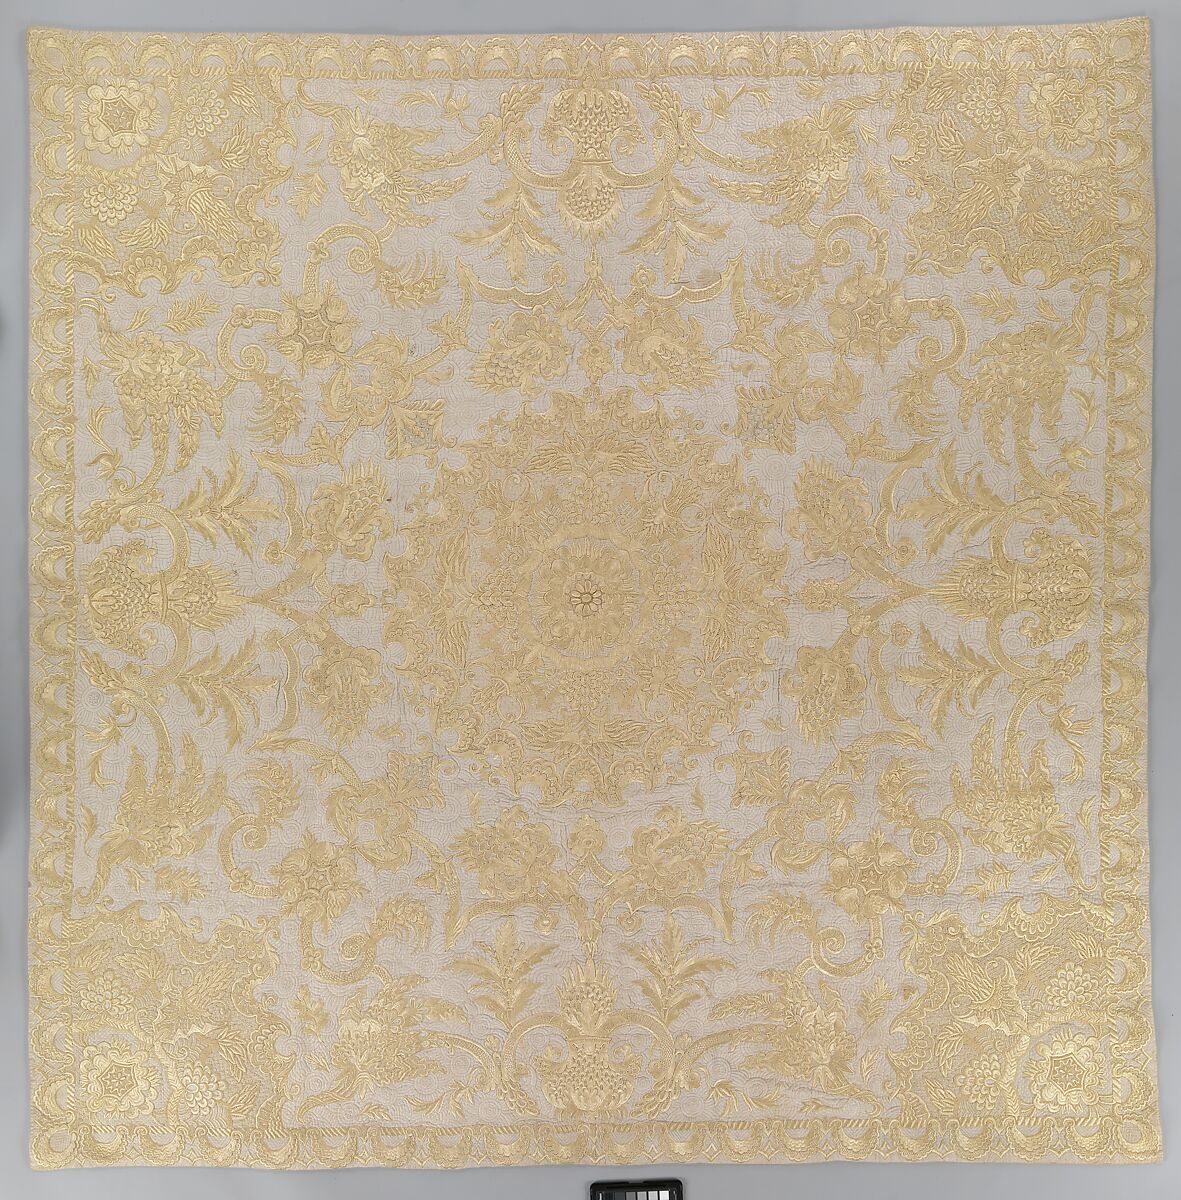 Bedspread, Cotton, embroidered with silk, British 